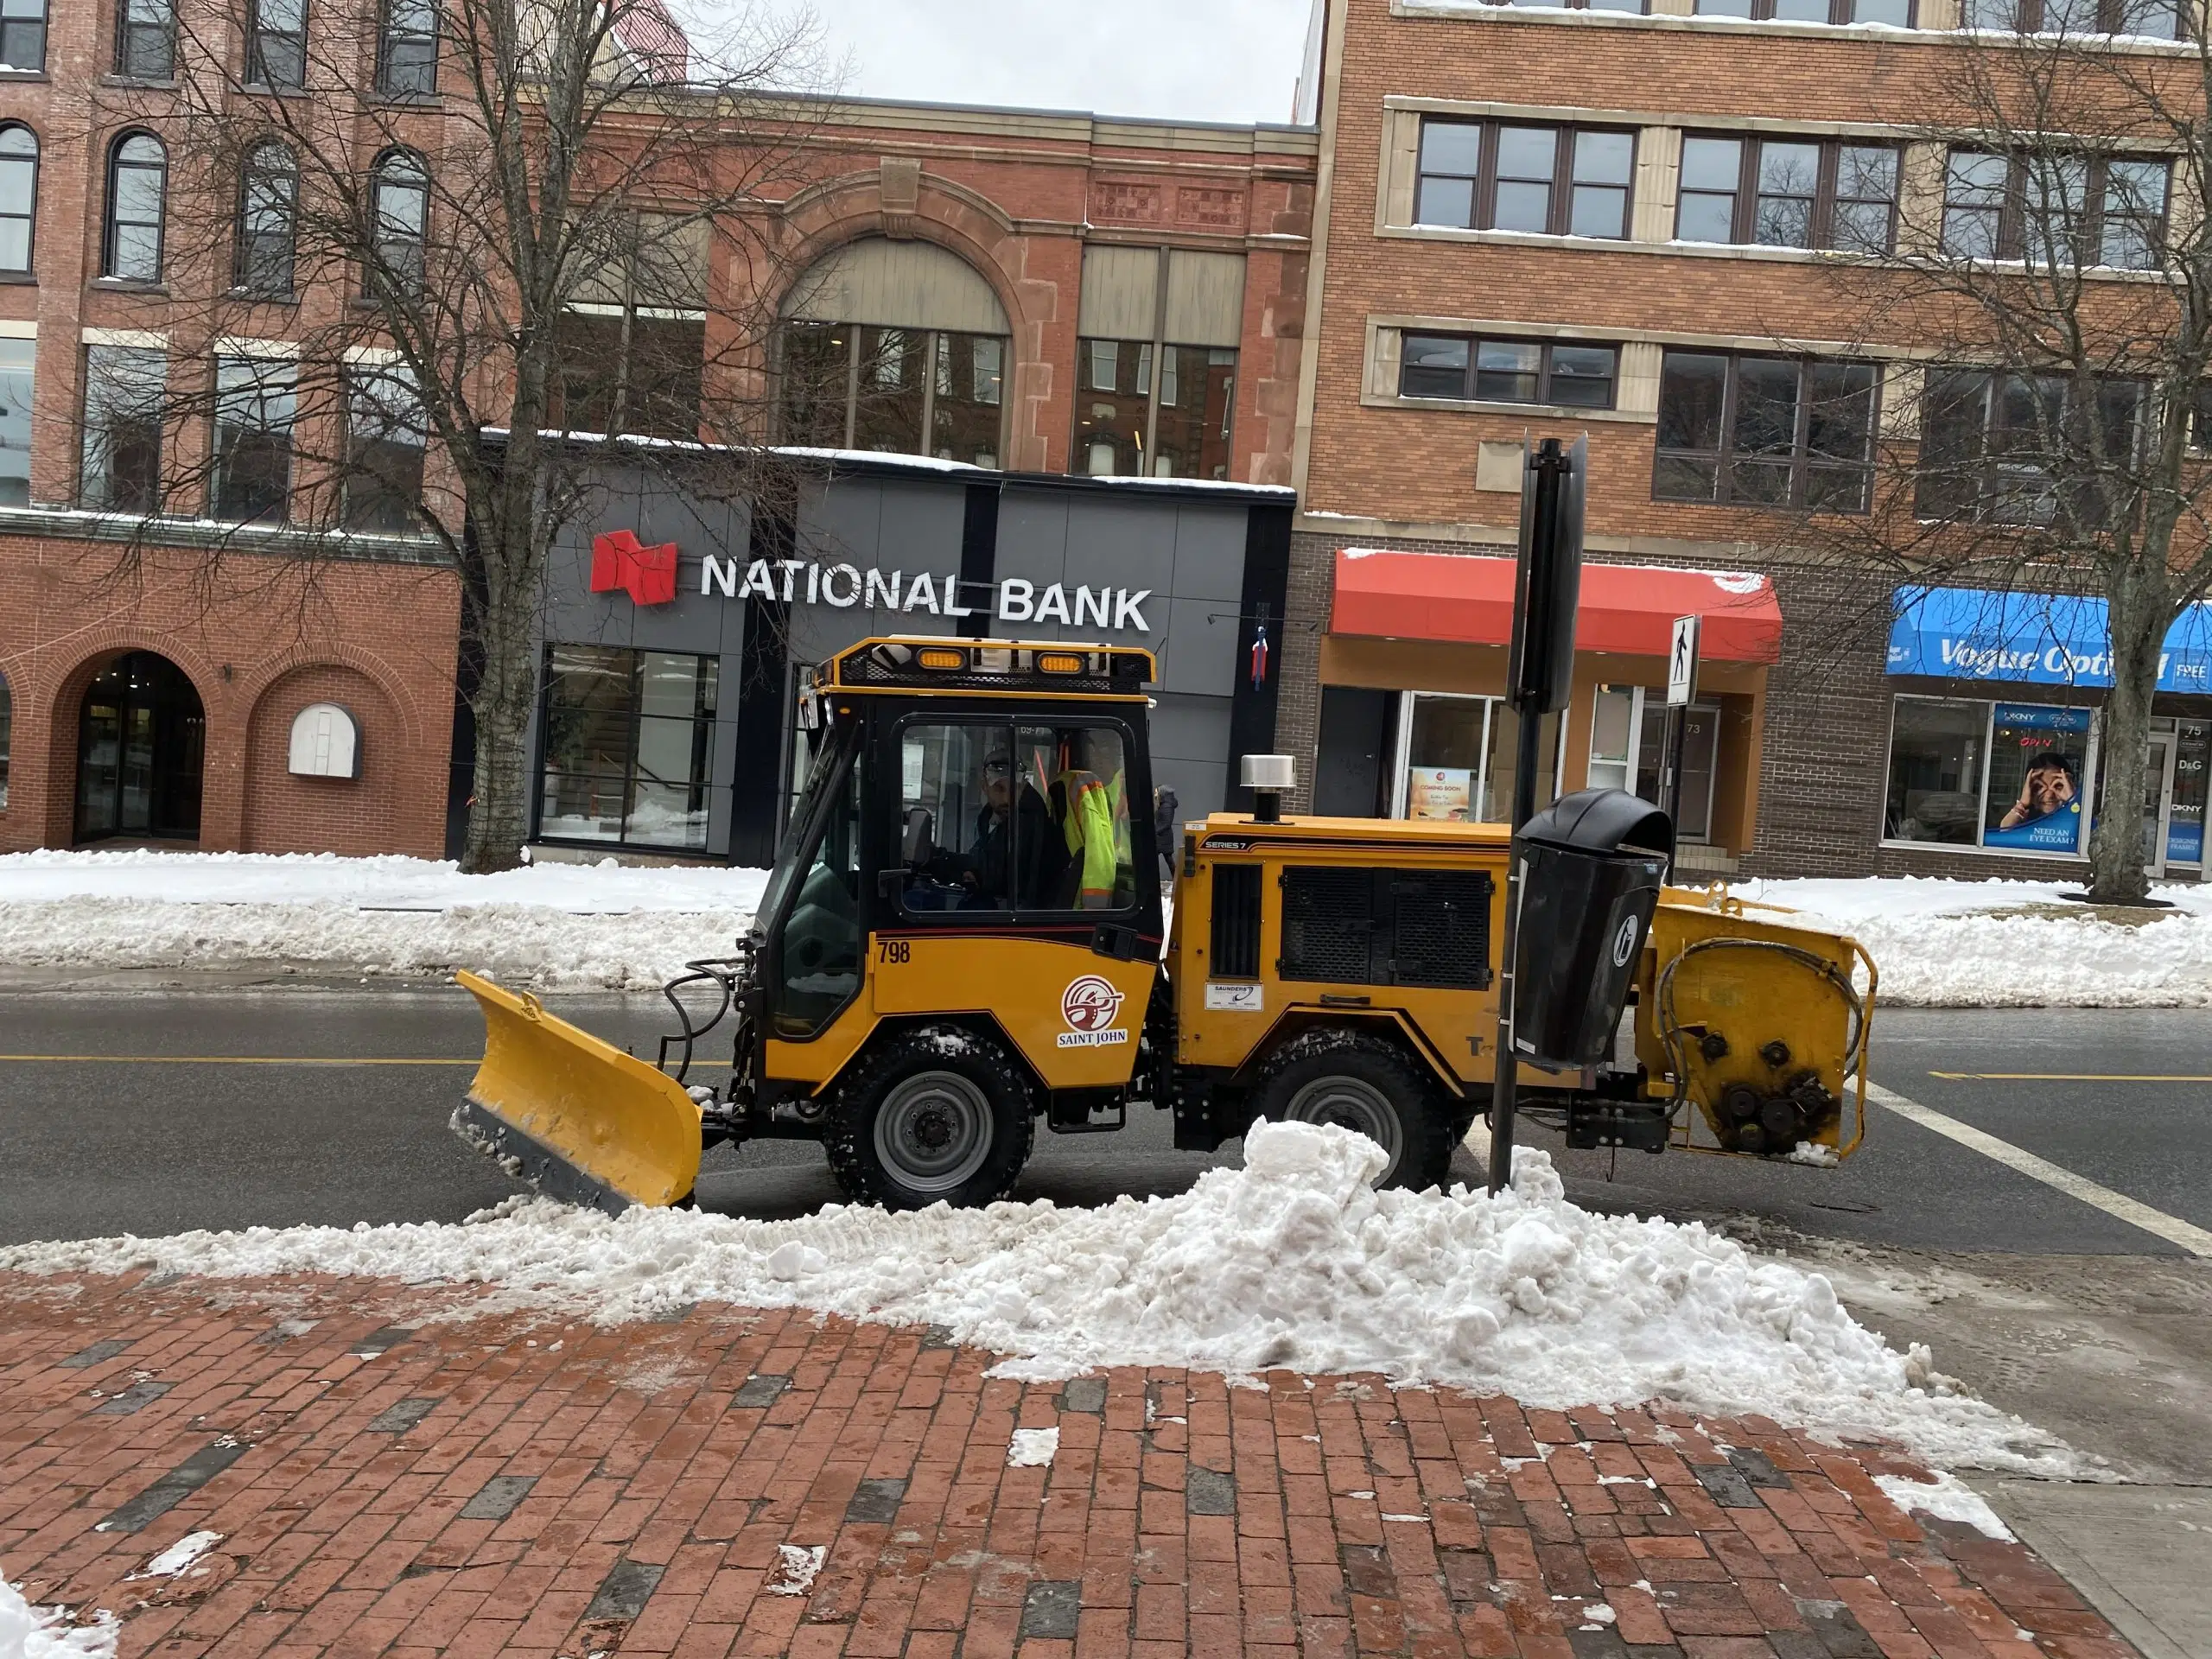 Sidewalk Snow Plowing Consolidated In The South-Central Peninsula